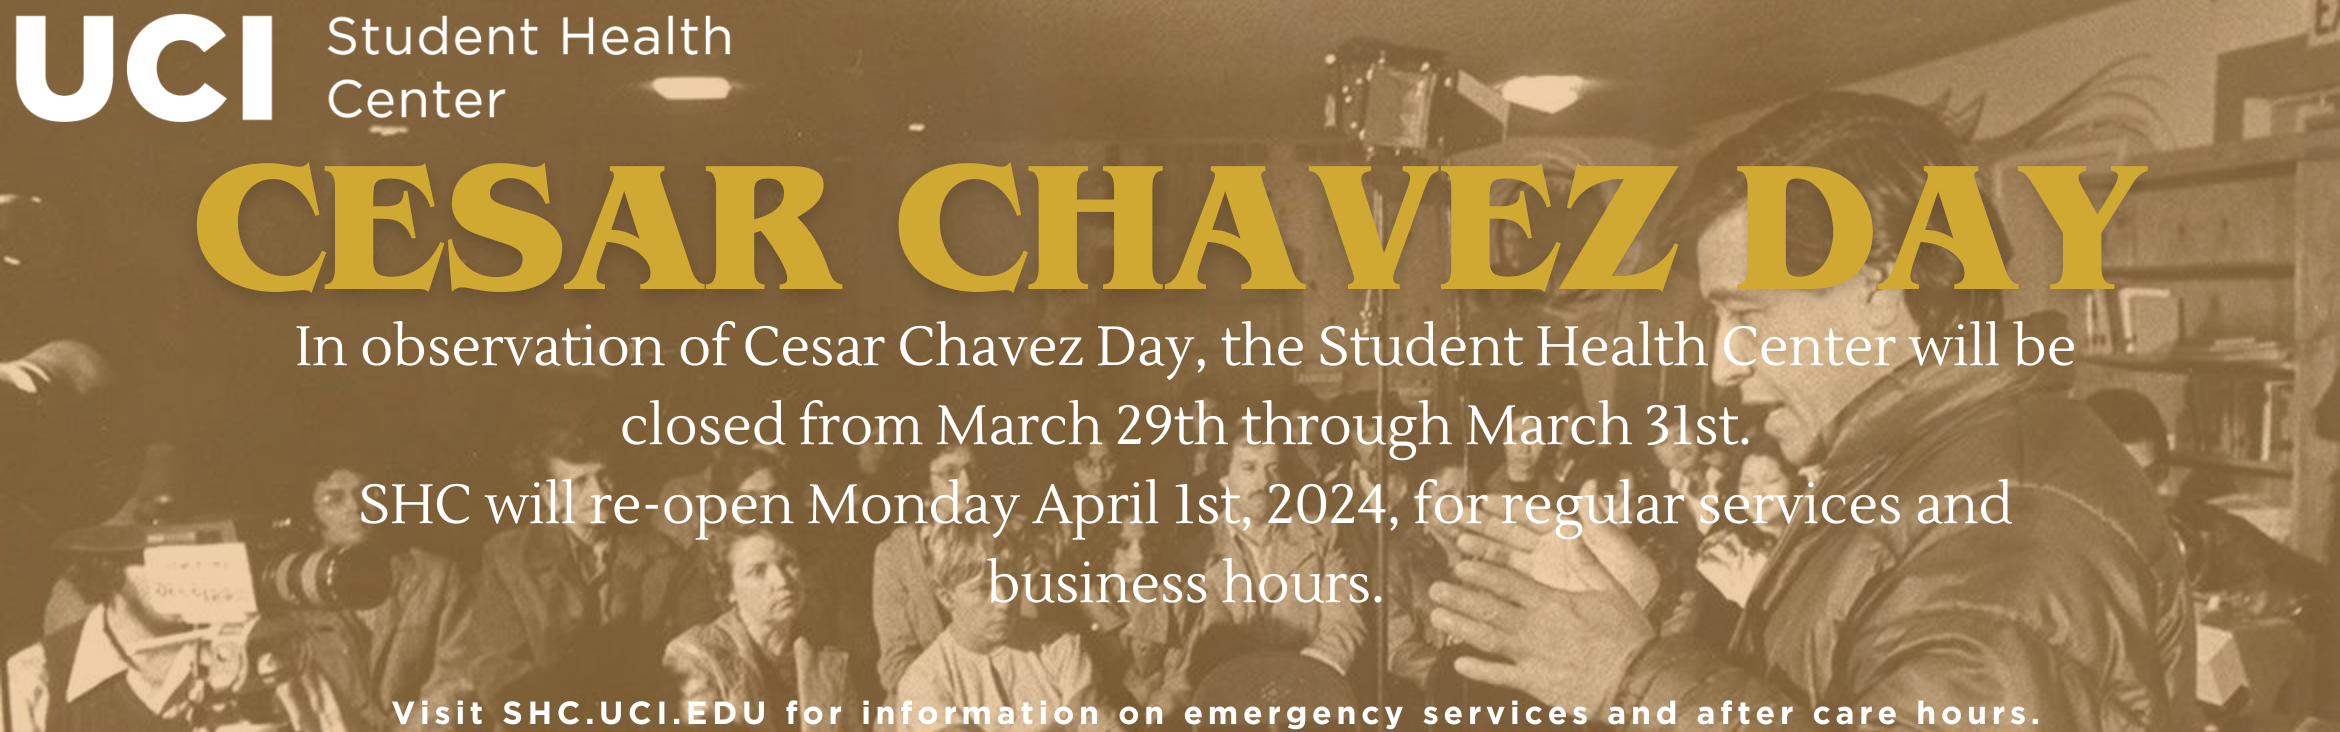 In observance of Cesar Chavez Day, the Student Health Center will be closed from March 29th through March 31st, 2024. The Student Health Center will re-open Monday April 1st, 2024 for regular services and business hours. 